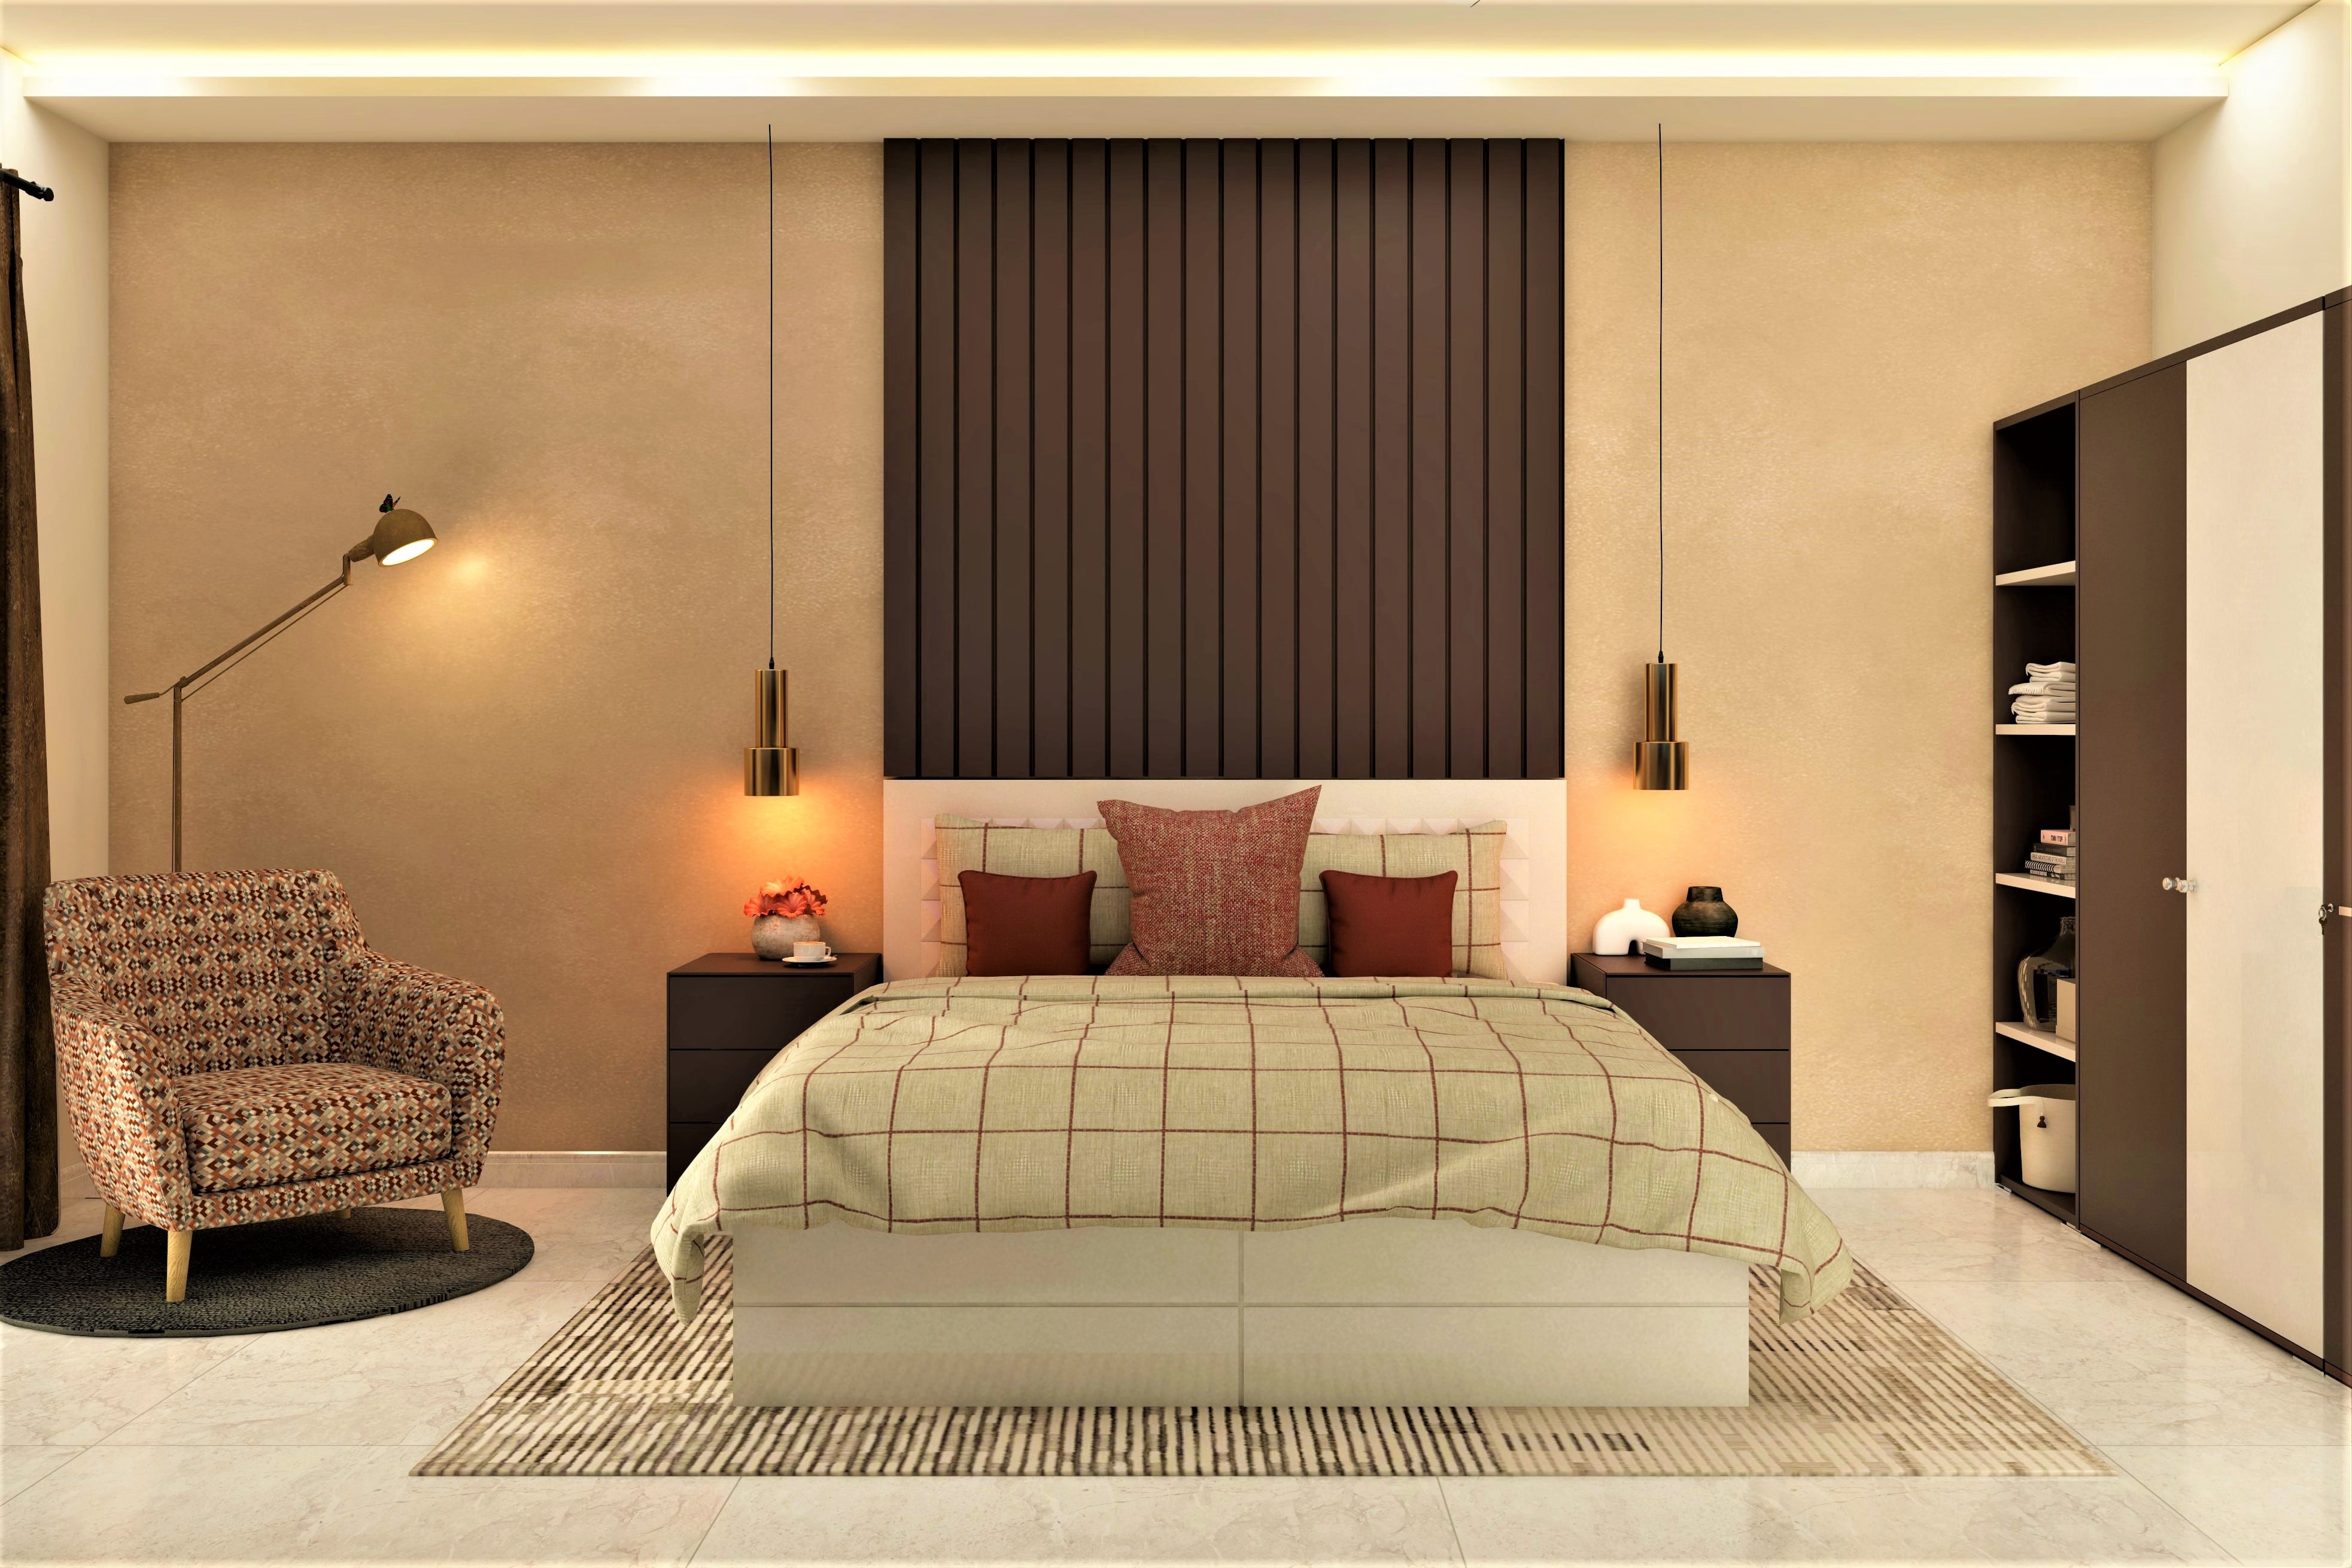 Warm and cozy bedroom design with ambient lighting - Beautiful Homes